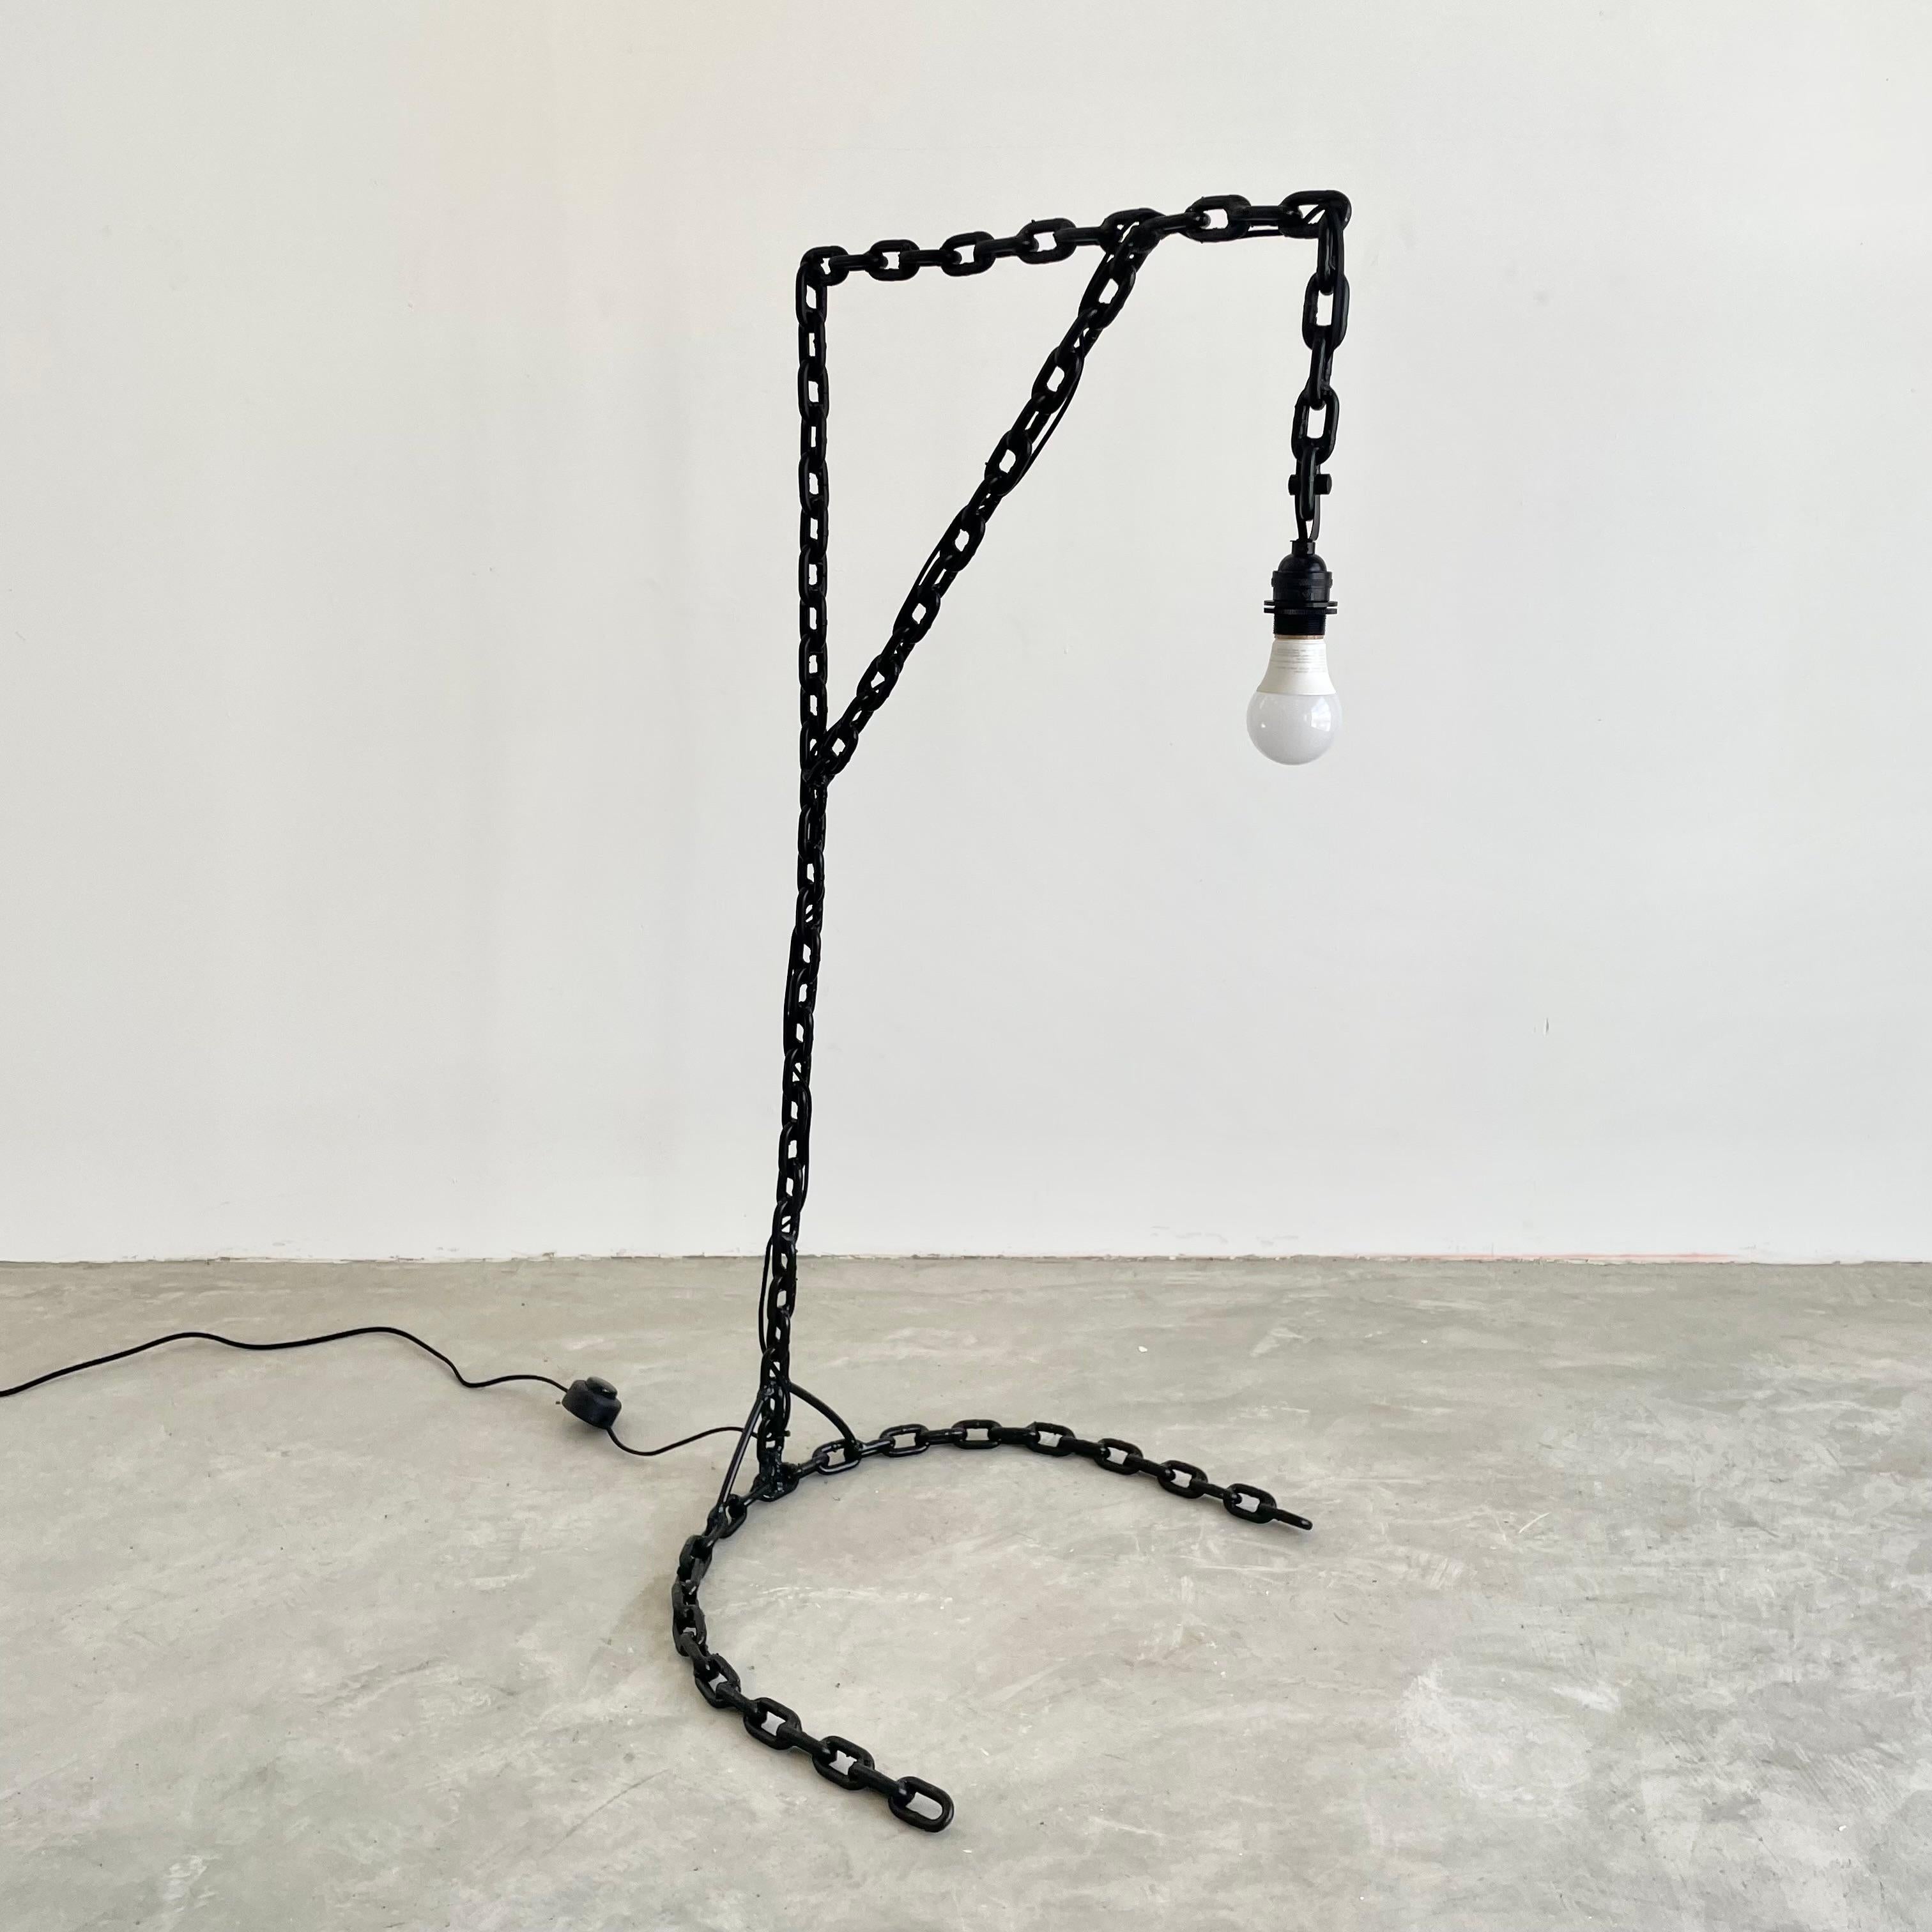 Brutalist iron chain link floor lamp from the UK. Just under 3.5 feet tall. Painted in a jet black paint and made of welded chain link with a cantilever detail making it perfect for low tables or reading chairs. Half moon base with electric cord